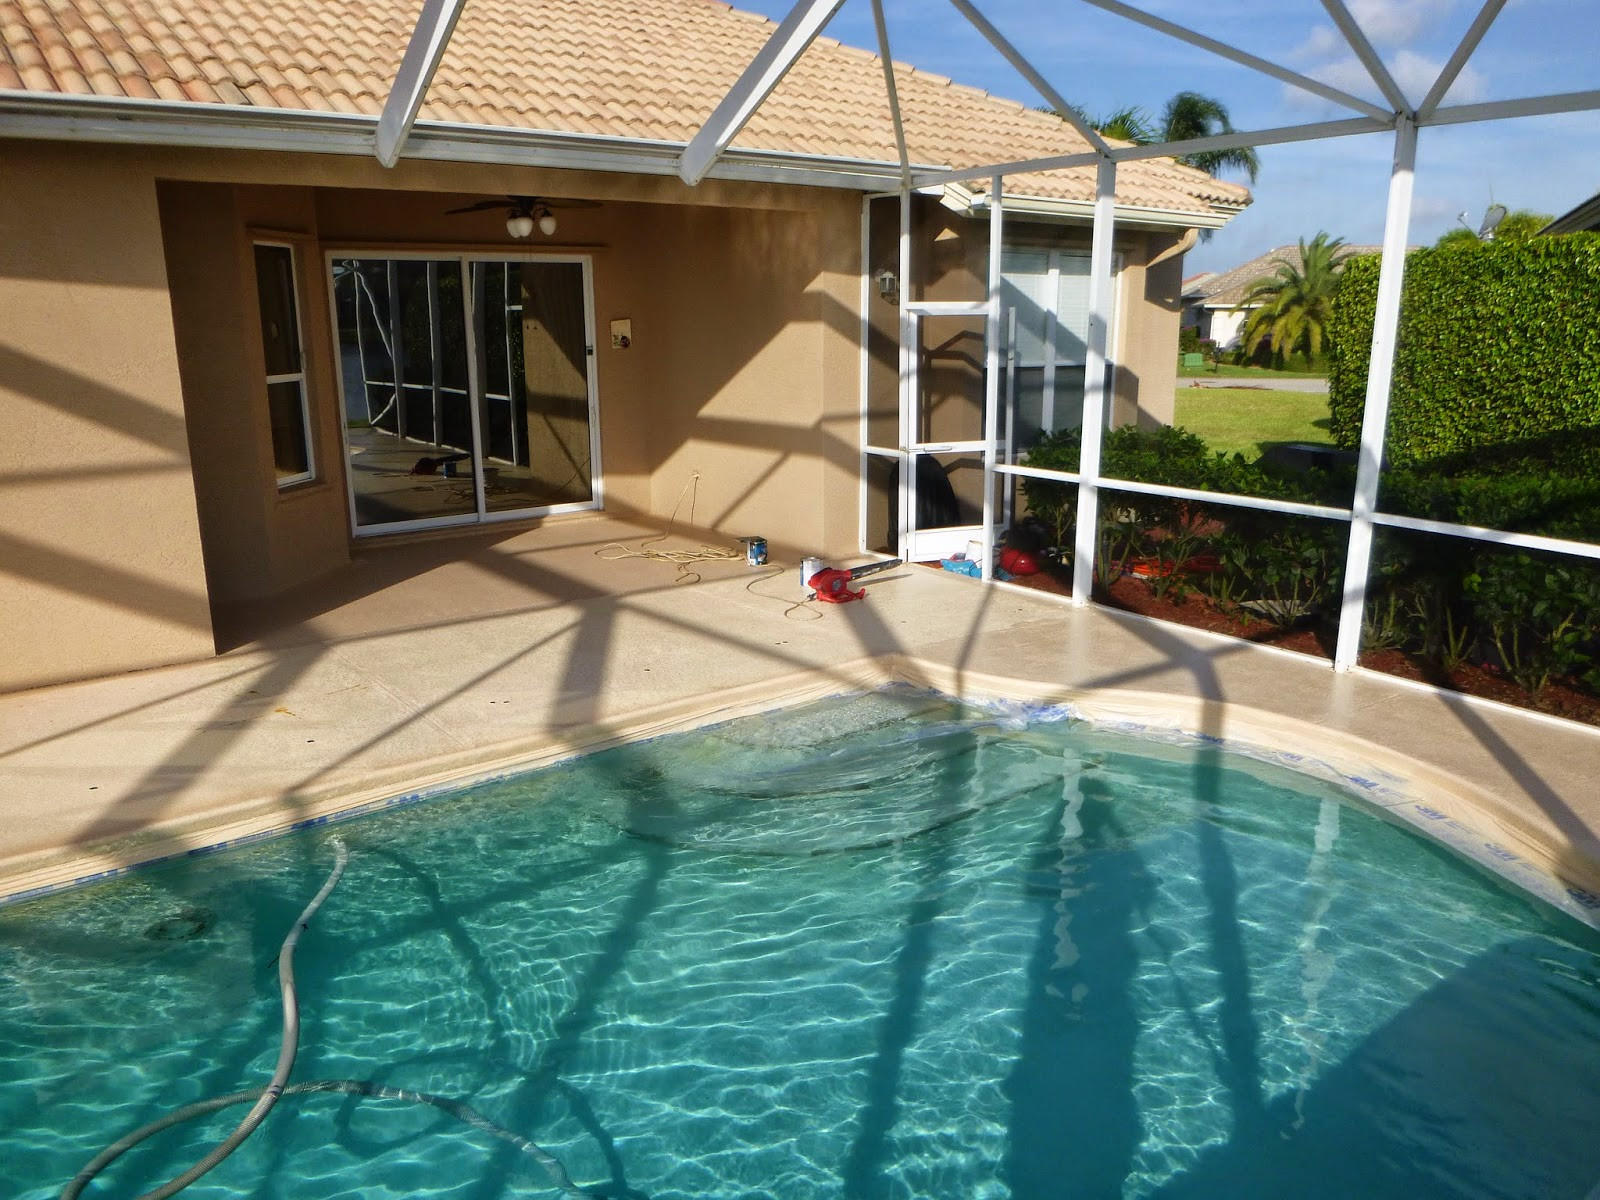 Painting Pool Deck
 Painting Artists Corp Painting pany Port St Lucie FL